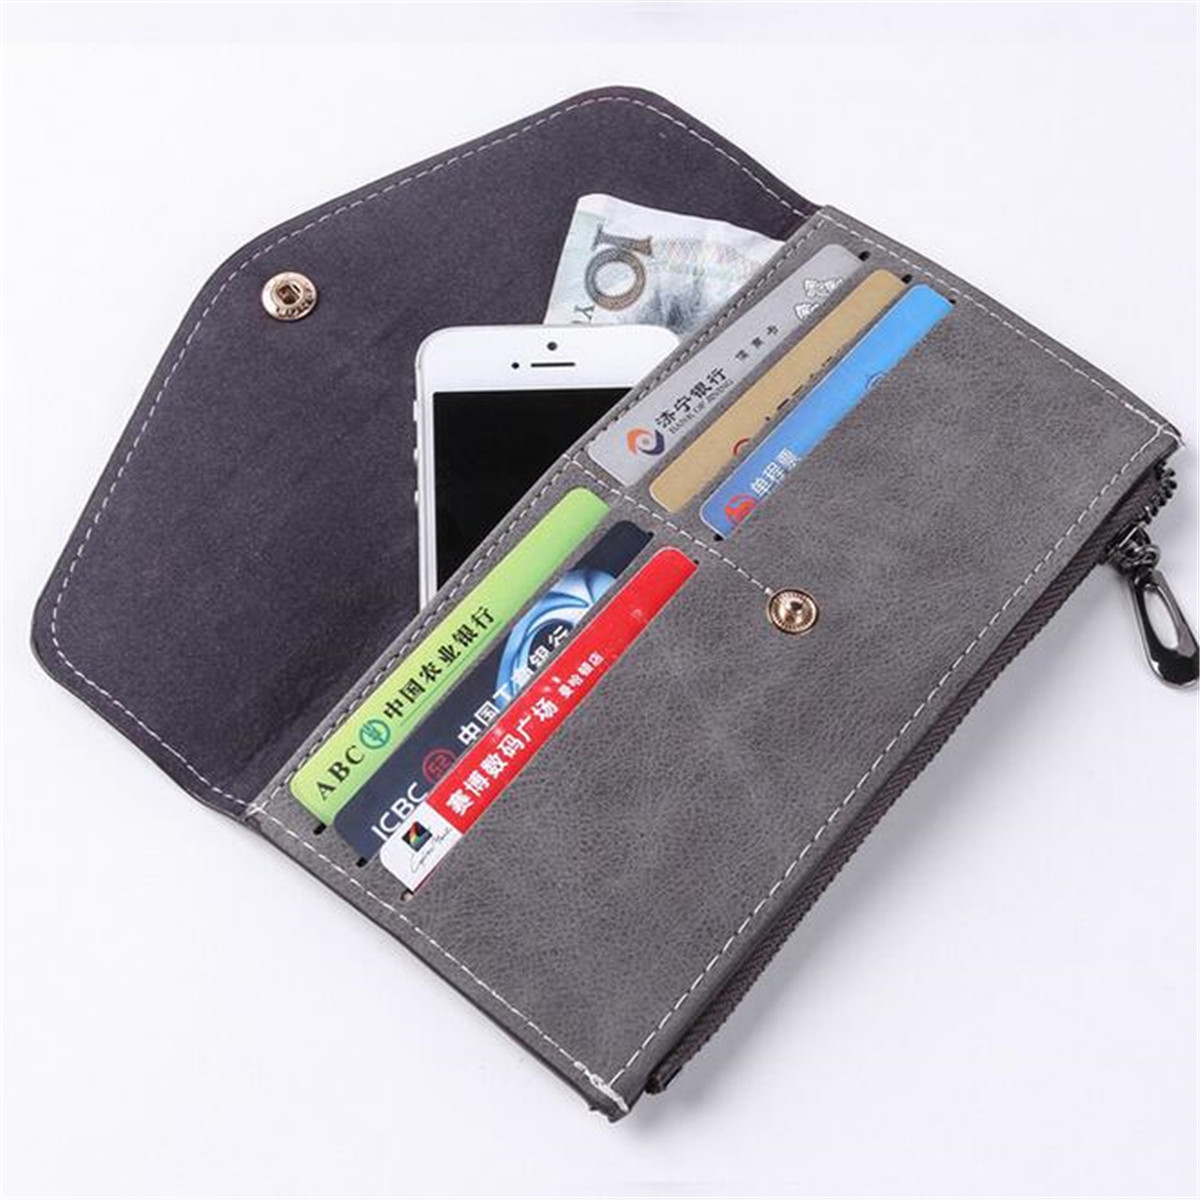 Clutch-Long-Purse-Leather-Wallet-Case-Phone-Bag-Card-Solt-Holder-for-iPhone-Samsung-Xiaomi-Huawei-1128698